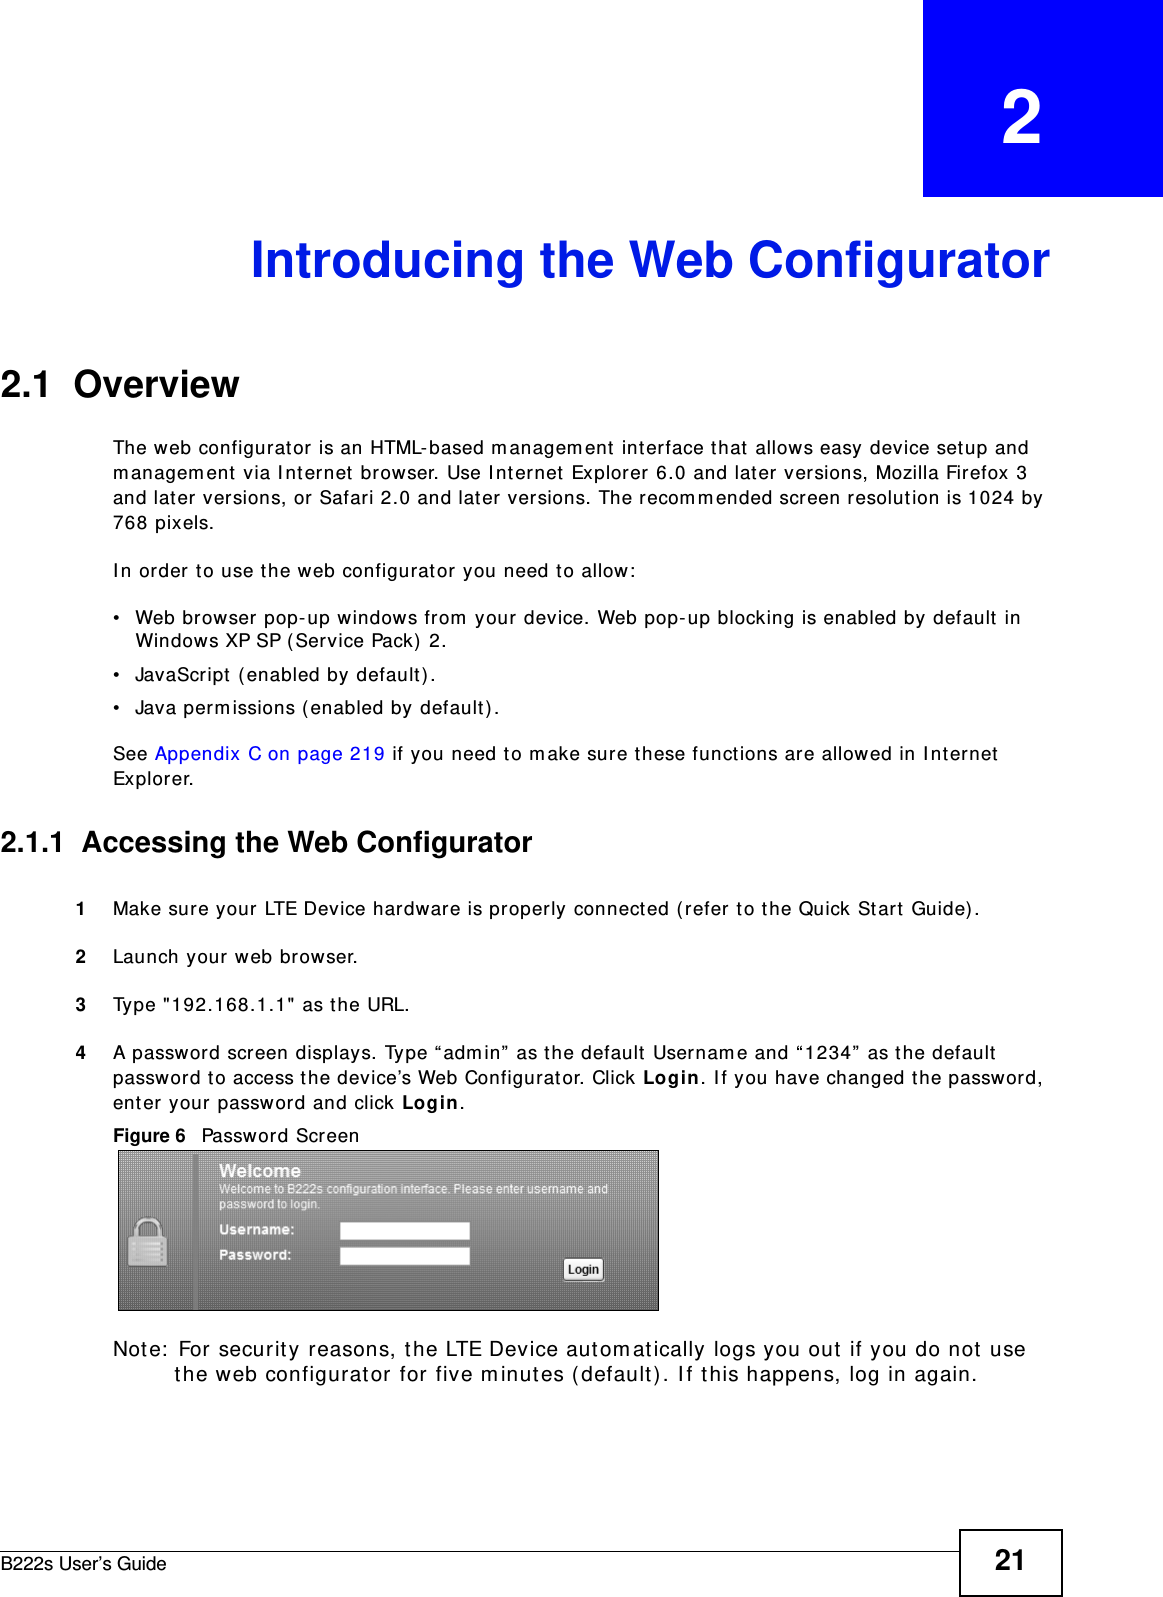 B222s User’s Guide 21CHAPTER   2Introducing the Web Configurator2.1  OverviewThe web configurator is an HTML- based m anagem ent  int erface t hat  allows easy device set up and m anagem ent via I nt ernet browser. Use I nt ernet Explorer 6.0 and later versions, Mozilla Firefox 3 and lat er versions, or Safari 2.0 and lat er versions. The recom m ended screen resolut ion is 1024 by 768 pixels.I n order t o use t he web configurat or you need t o allow:• Web browser pop- up windows from  your device. Web pop- up blocking is enabled by default in Windows XP SP (Service Pack)  2.• JavaScript  ( enabled by default ).• Java perm issions ( enabled by default) .See Appendix C on page 219 if you need t o m ake sure these functions are allowed in I nt ernet  Explorer.2.1.1  Accessing the Web Configurator1Make sure your LTE Device hardware is properly connect ed ( refer t o t he Quick St art  Guide) .2Launch your web br owser.3Type &quot;192.168.1.1&quot; as t he URL.4A password screen displays. Ty pe “ adm in”  as t he default  Usernam e and “1234”  as t he default  passw ord to access the device’s Web Configurat or. Click Login. I f you have changed t he passwor d, enter your password and click Login.Figure 6   Password ScreenNote:  For security reasons, t he LTE Device aut om at ically logs you out  if you do not use the web configurator for five m inutes ( default) . I f t his happens, log in again. 